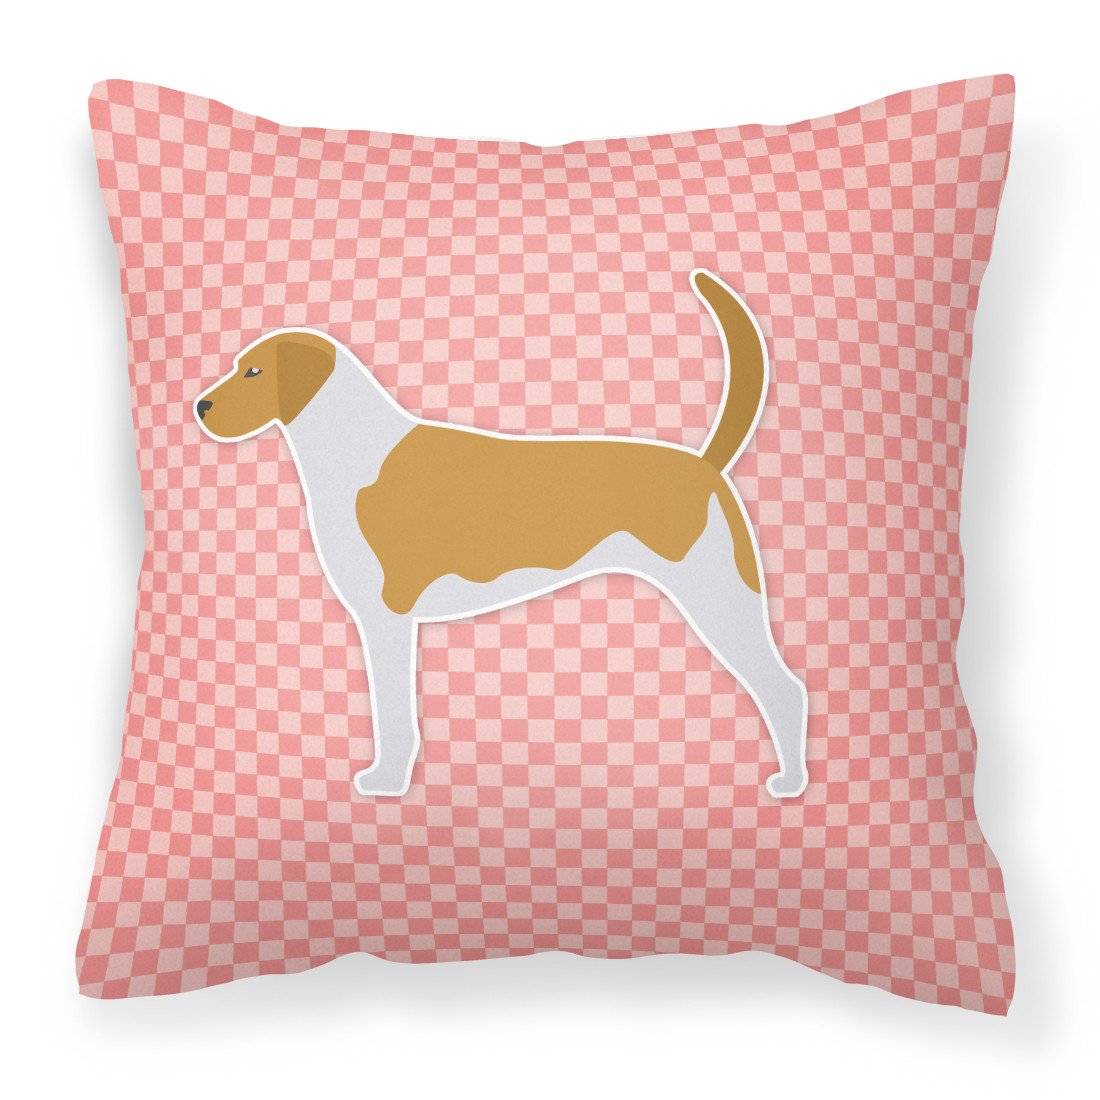 American Foxhound Checkerboard Pink Fabric Decorative Pillow BB3598PW1818 by Caroline's Treasures